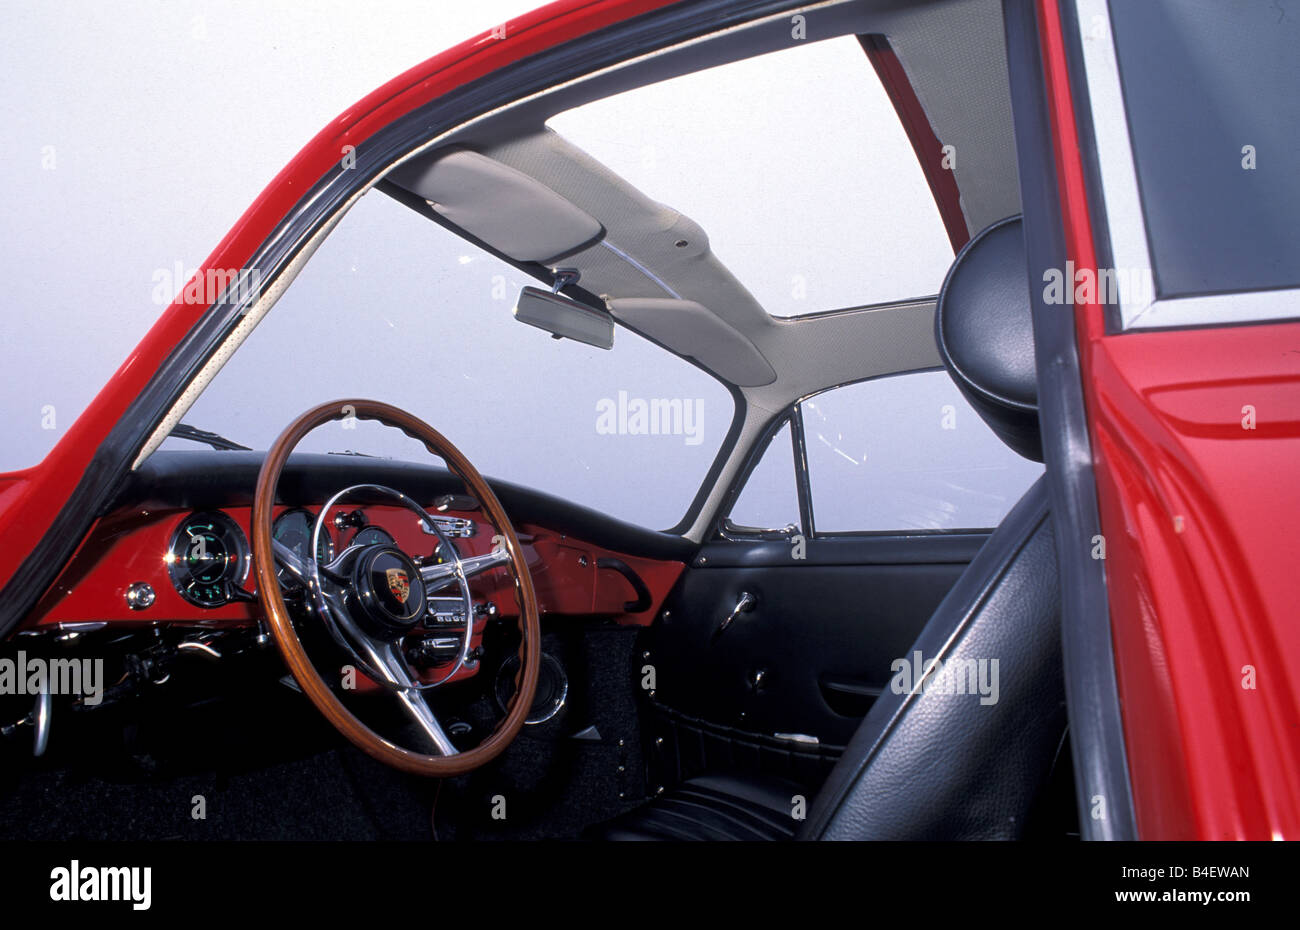 Car, Porsche 356 Carrera 2, model year 1963, red, sports car, Coupé, Coupe,  red, vintage car, 1960s, sixties, interior, Cockpit Stock Photo - Alamy